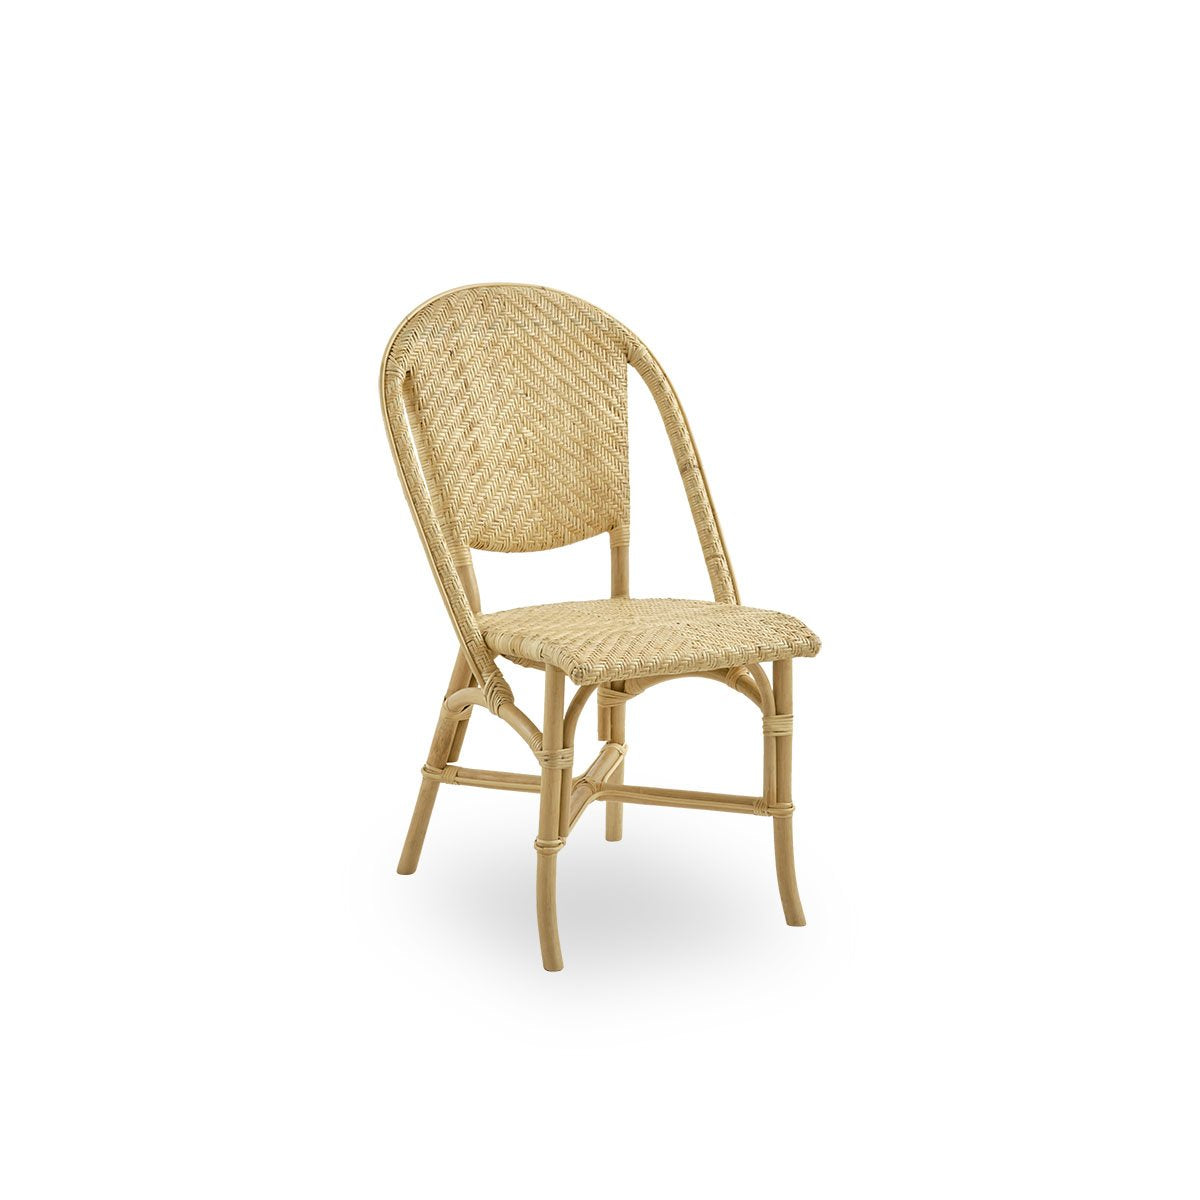 Alanis Chair by Sika